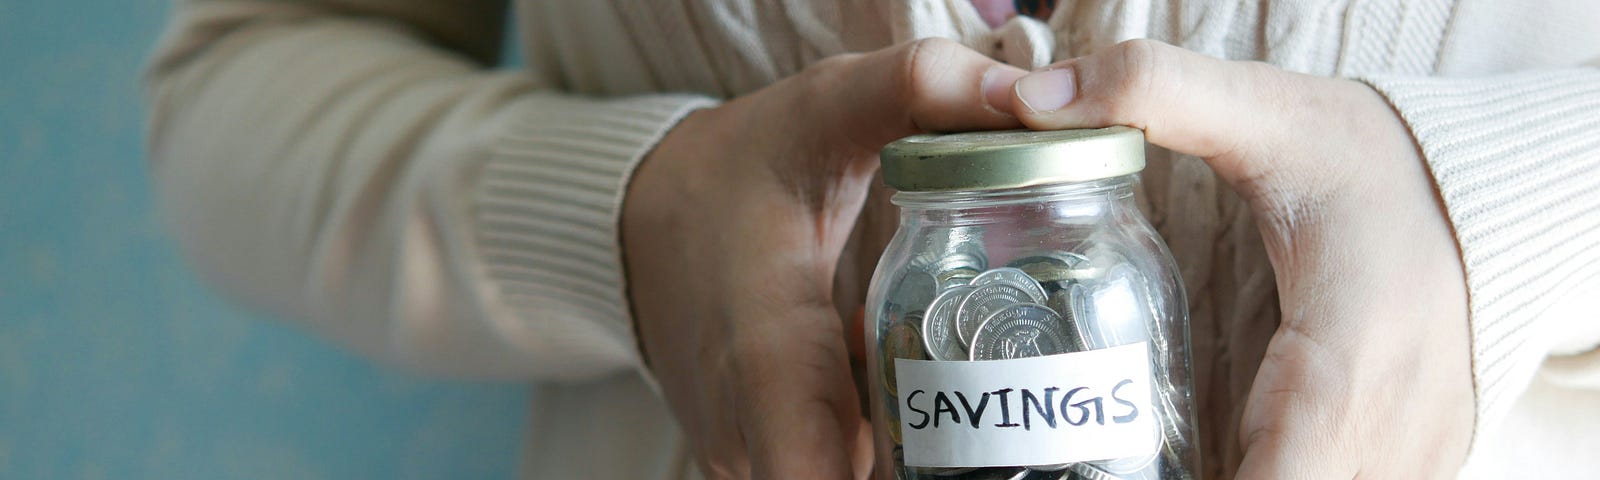 Elderly lady hands holding glass jar of coins that is labels savings.